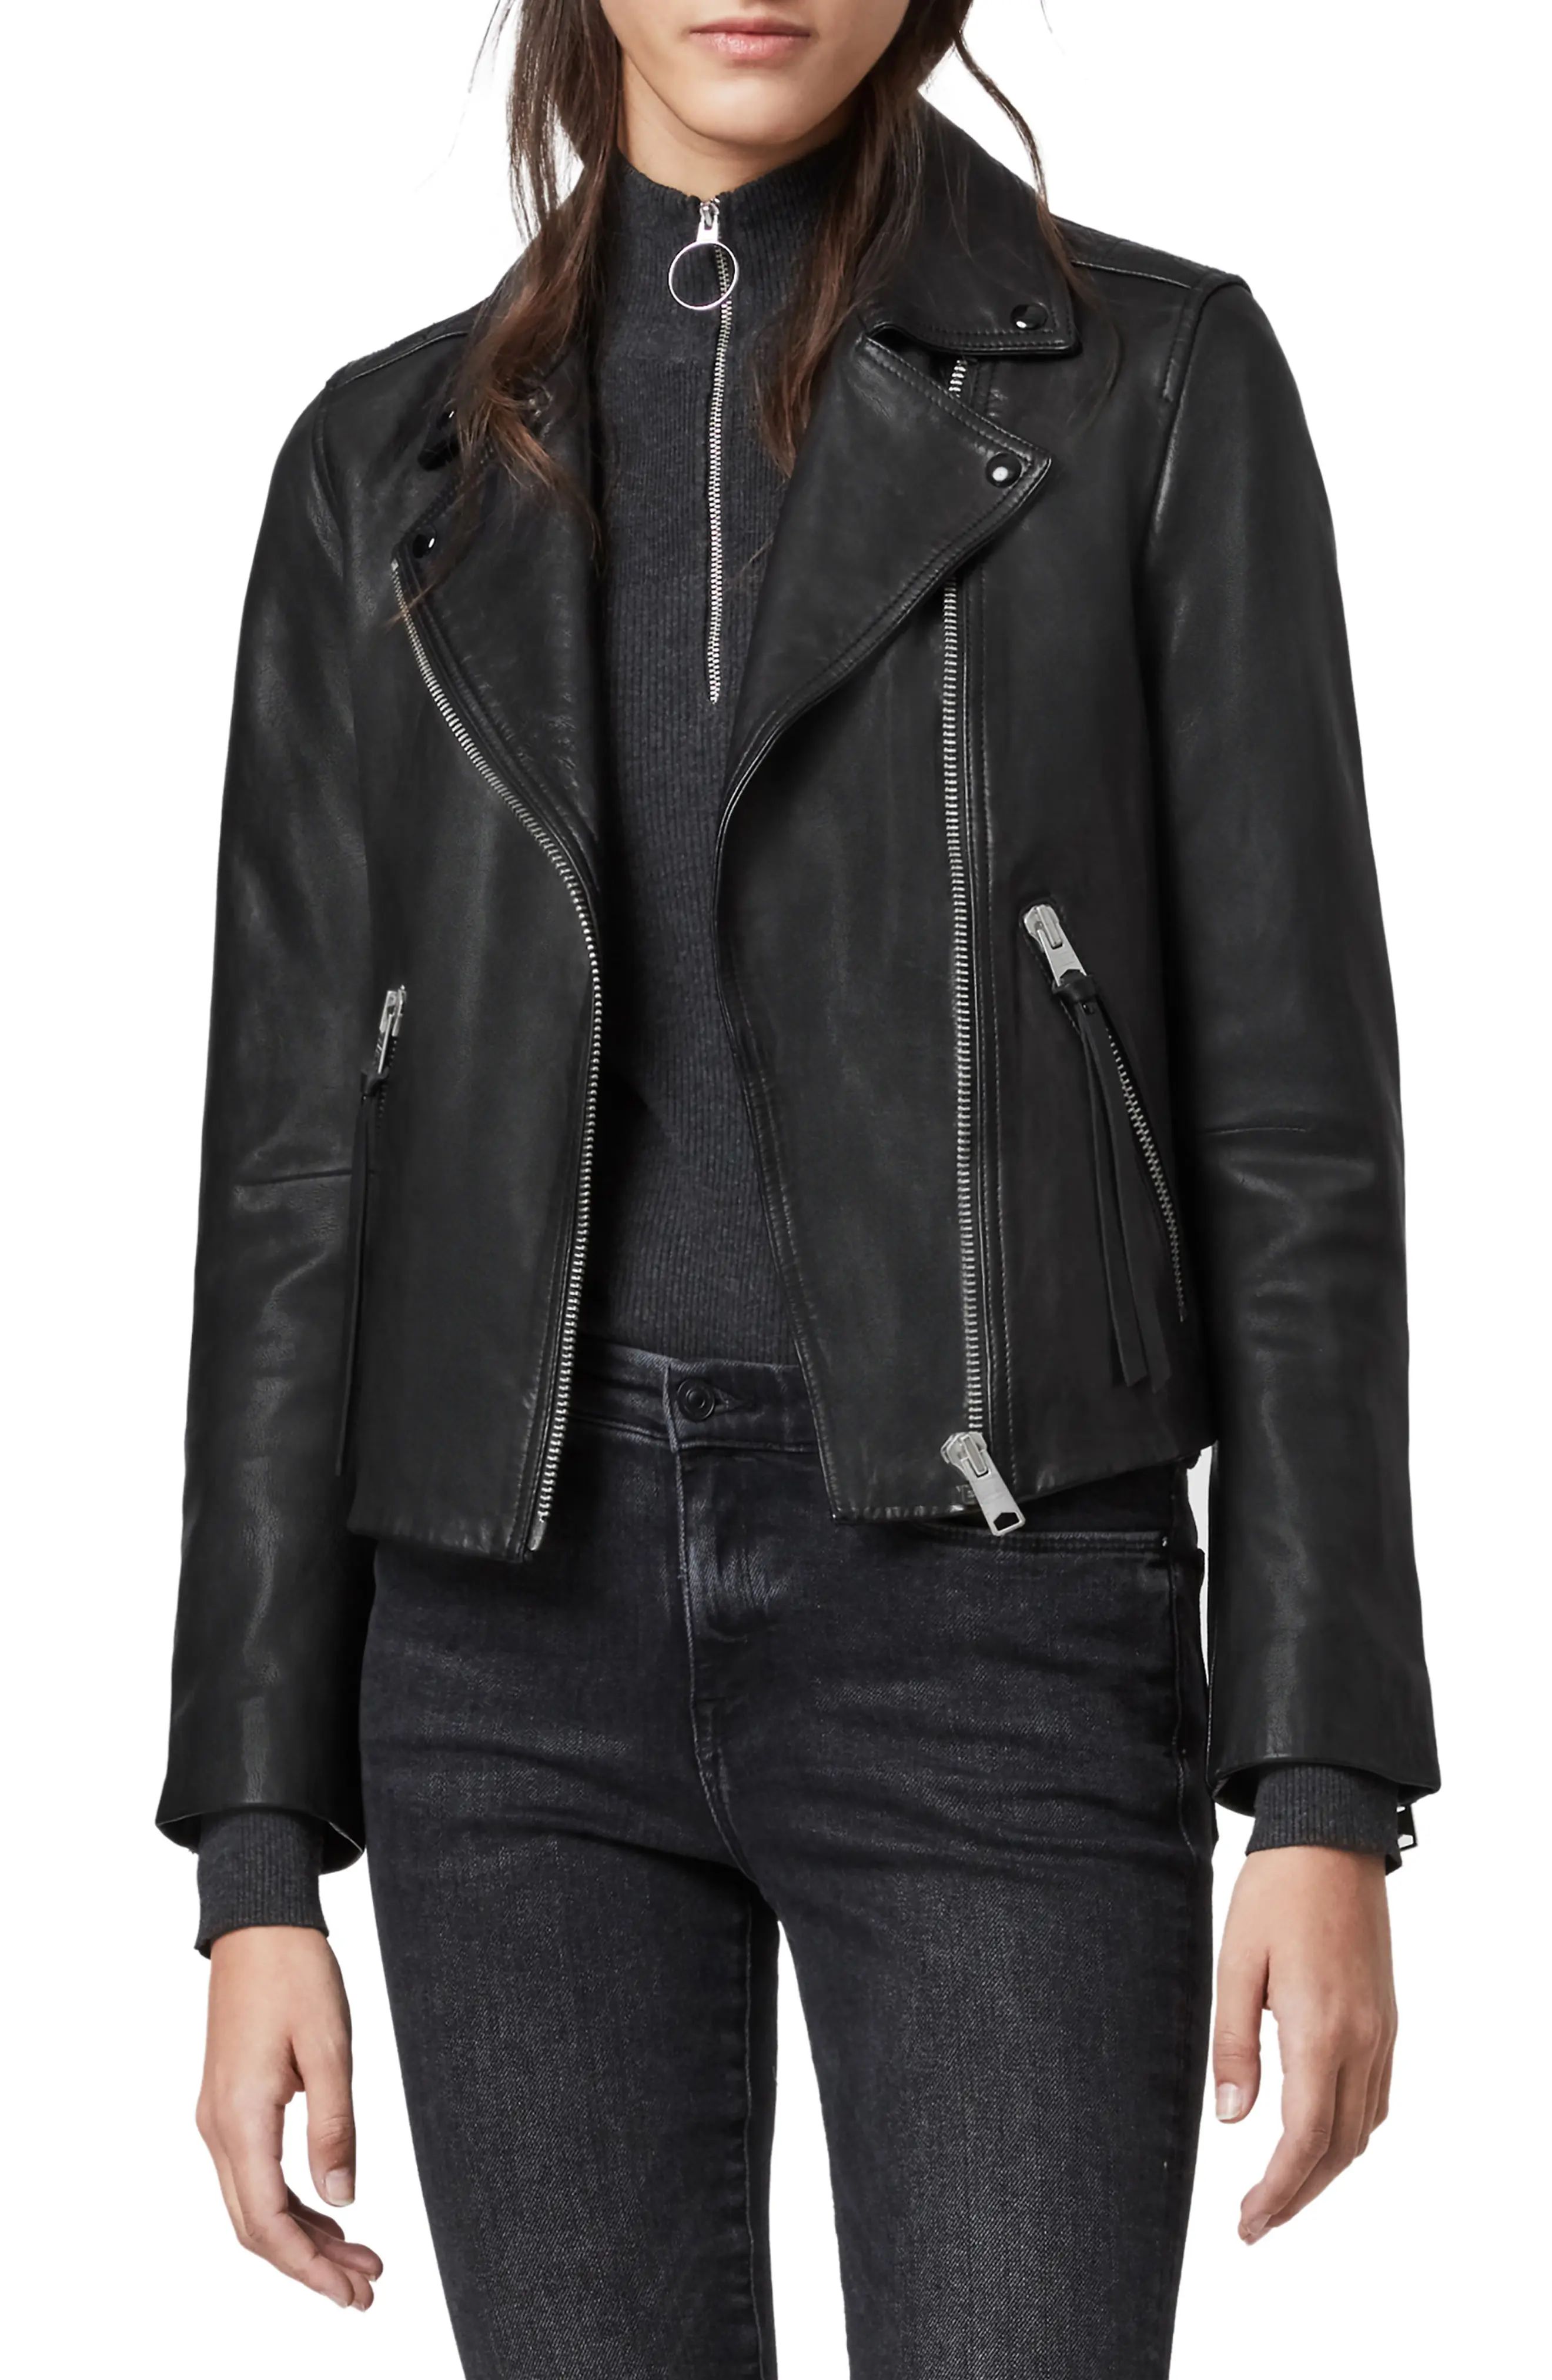 Anniversary Sale Women's Jackets Clothing | Nordstrom | Nordstrom